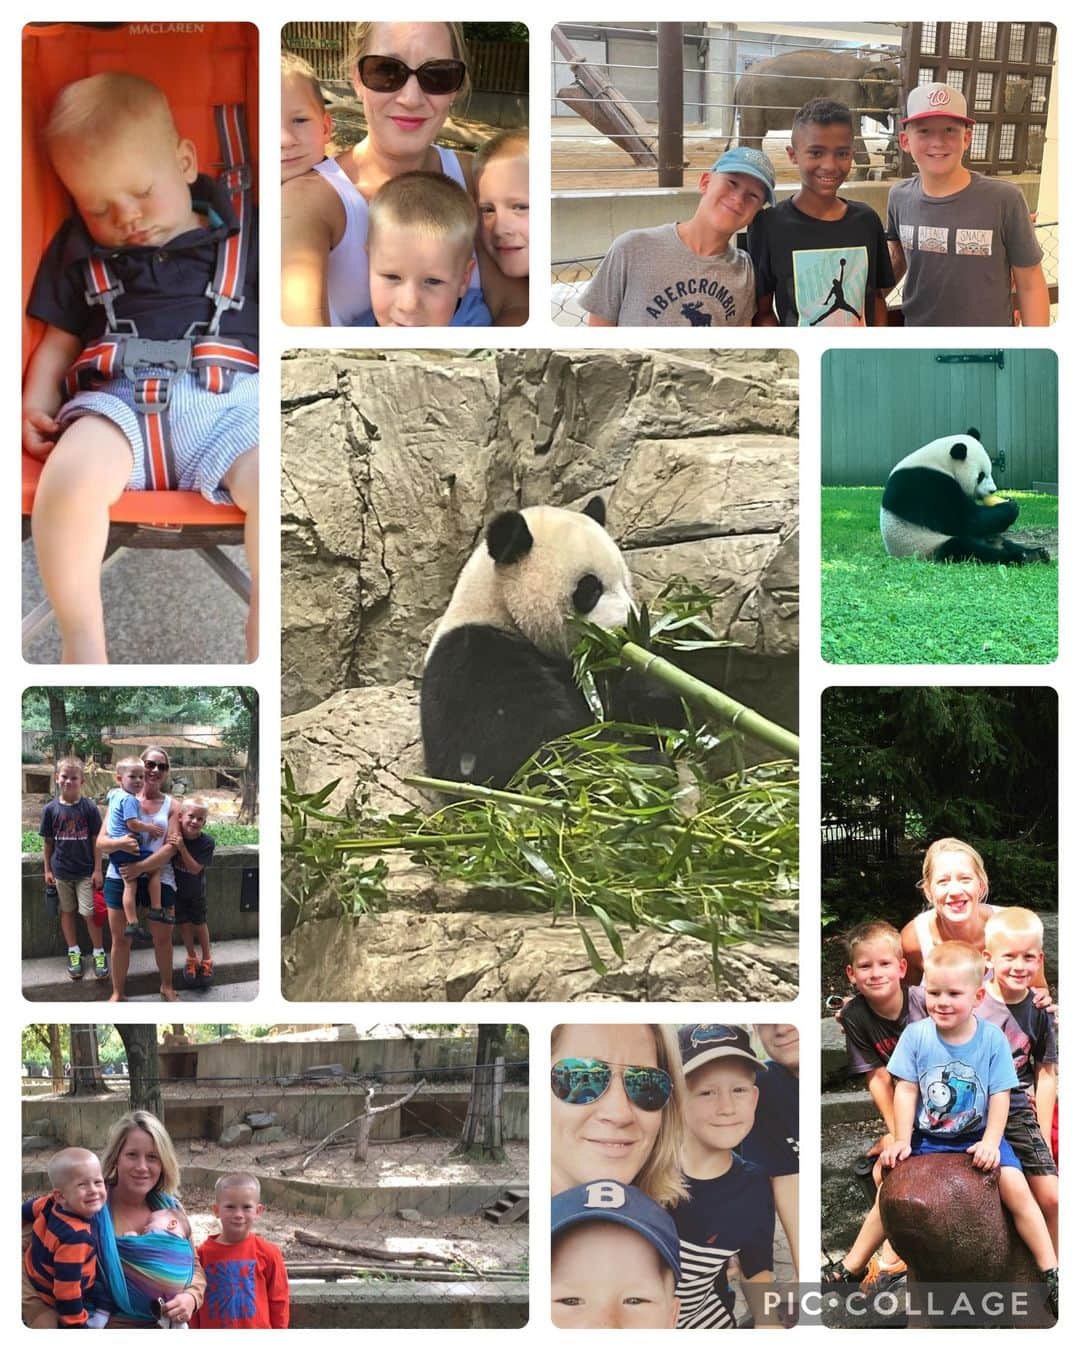 スミソニアン国立動物園のインスタグラム：「In honor of our giant panda program, we asked for your favorite memories of the Zoo's giant pandas over the decades. These are your stories. 🐼  "The last three panda babies are synonymous with my motherhood journey and my love affair with the National Zoo. I had my first baby in 2008; we started going to the Zoo regularly when Lucas was an infant (he napped in his stroller on his first trip), and we fell in love with Tian Tian and Mei Xiang--it was so special to have pandas at our Zoo. I had my second baby in 2011, and in 2012, I remember the joy and then the searing pain when Mei had, and lost, her baby.   The next year, I took my two little boys to see Bao Bao, the ball of black and white fluff, who we first watched on the PandaCam as a squealing stick of butter. We wept when she left but were overjoyed to welcome Bei Bei and then Xiao Qi Ji. Taking my now three boys to see the pandas has become a summer ritual for us. We pack a lunch of pasta salad and we know exactly when to arrive to get a good spot in lot B. We head for the Asia trail so we can see the pandas in their early morning glory. We've watched panda babies come and go as I've watched my own children grow from little boys into young men. The thought of losing our beloved Mei and Tian and the promise of new life that they bring makes me weepy, just as I weep at the thought of my own kids flying the nest. It’s been so comforting to know that those magical, spotted, black-and-white balls of fluff would be there, munching on frozen watermelon and bamboo or rolling in the snow. They are part of the background music of my life as a mother. What a hole they will leave.” - Leigh T. of Maryland  Image description: a collage of 9 photos, showing a woman and her 3 sons. The photos range from pictures of babies to school aged children. Two photos are of pandas at the National Zoo.」